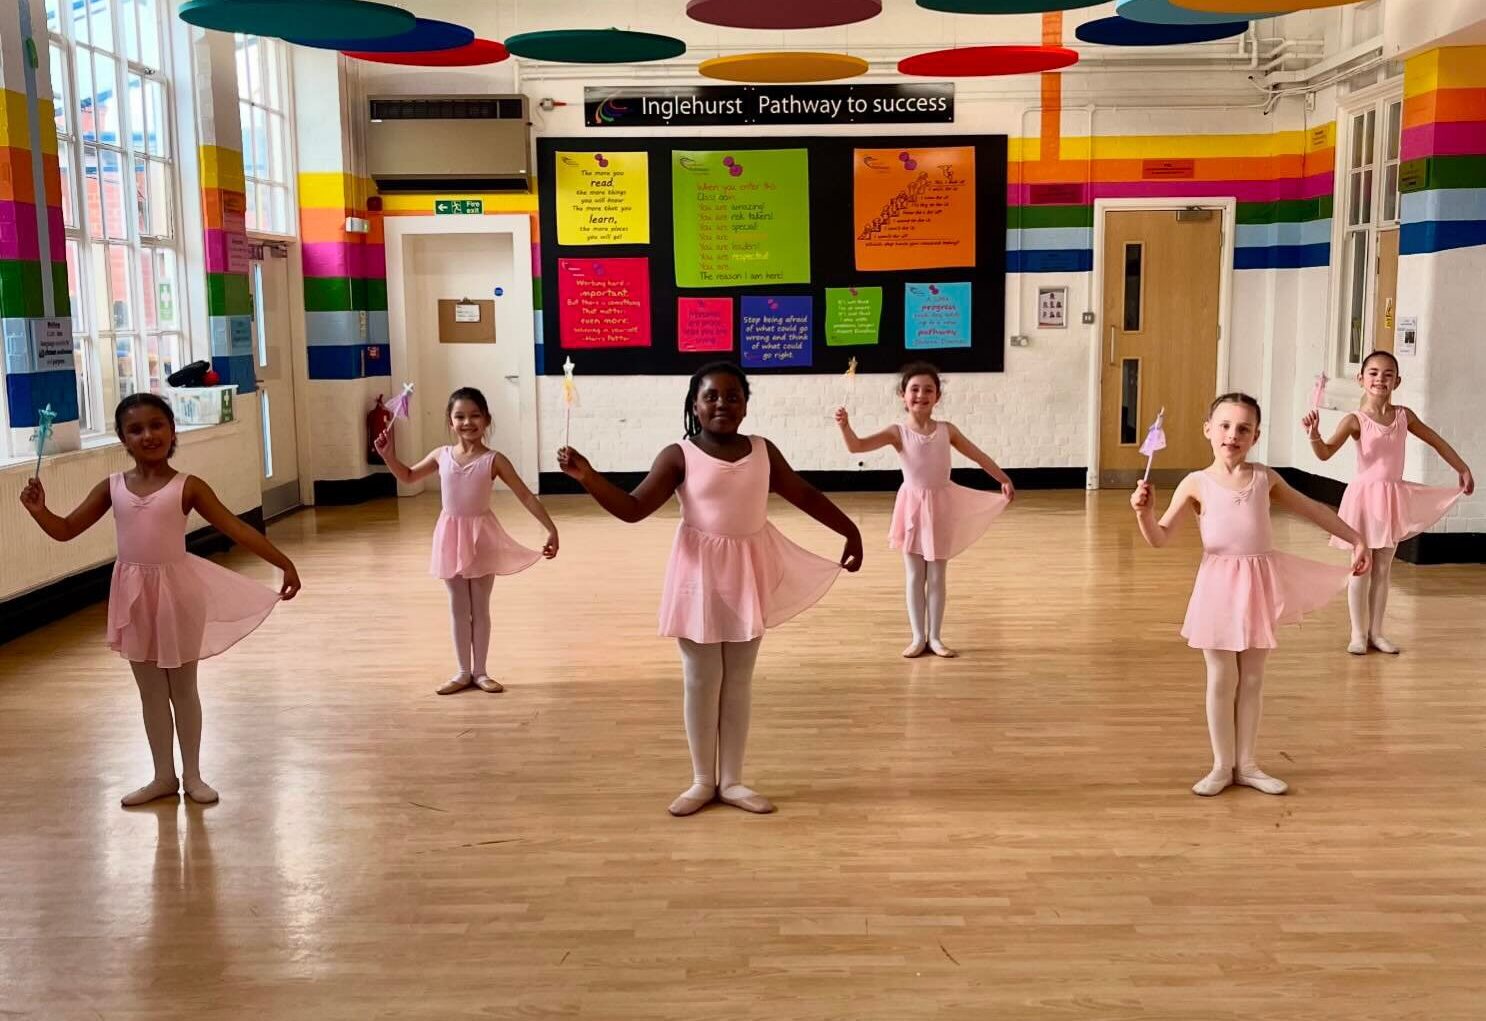 Dance Central Achieves 100% Pass Rate in Latest ISTD Exams